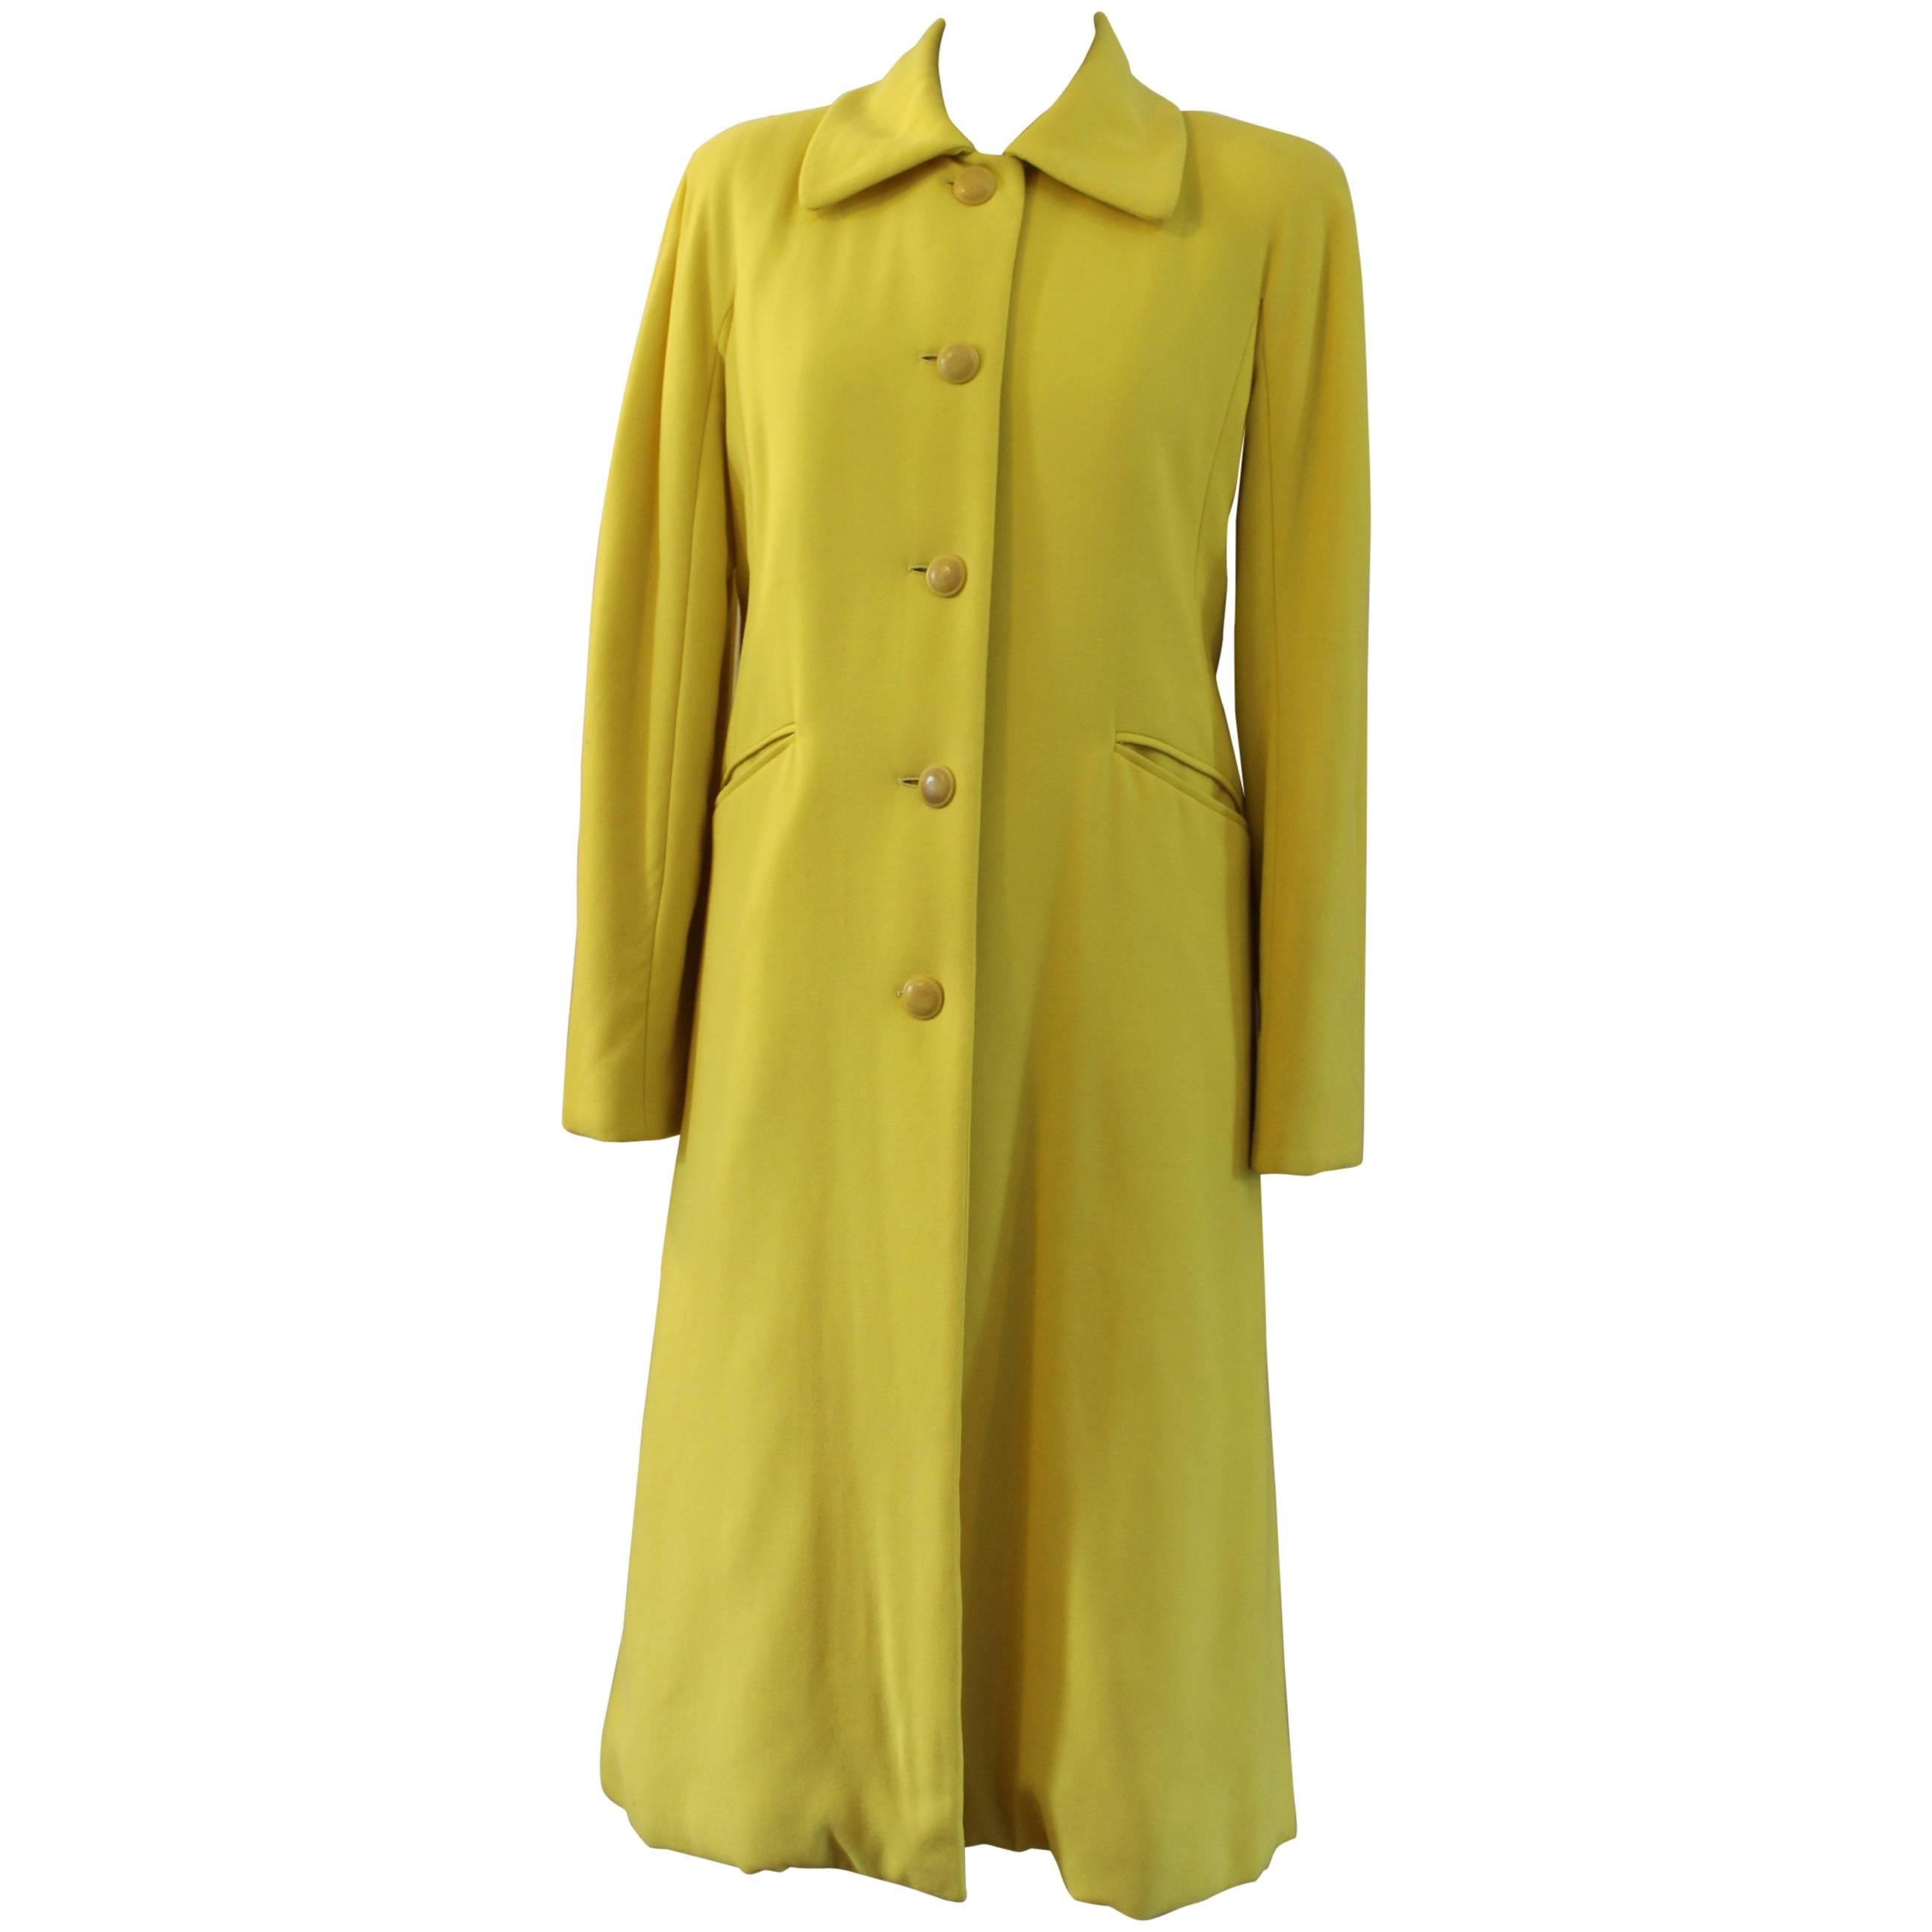 Vintage Hermes Yellow Coat in Wool. Size 38 (Small)